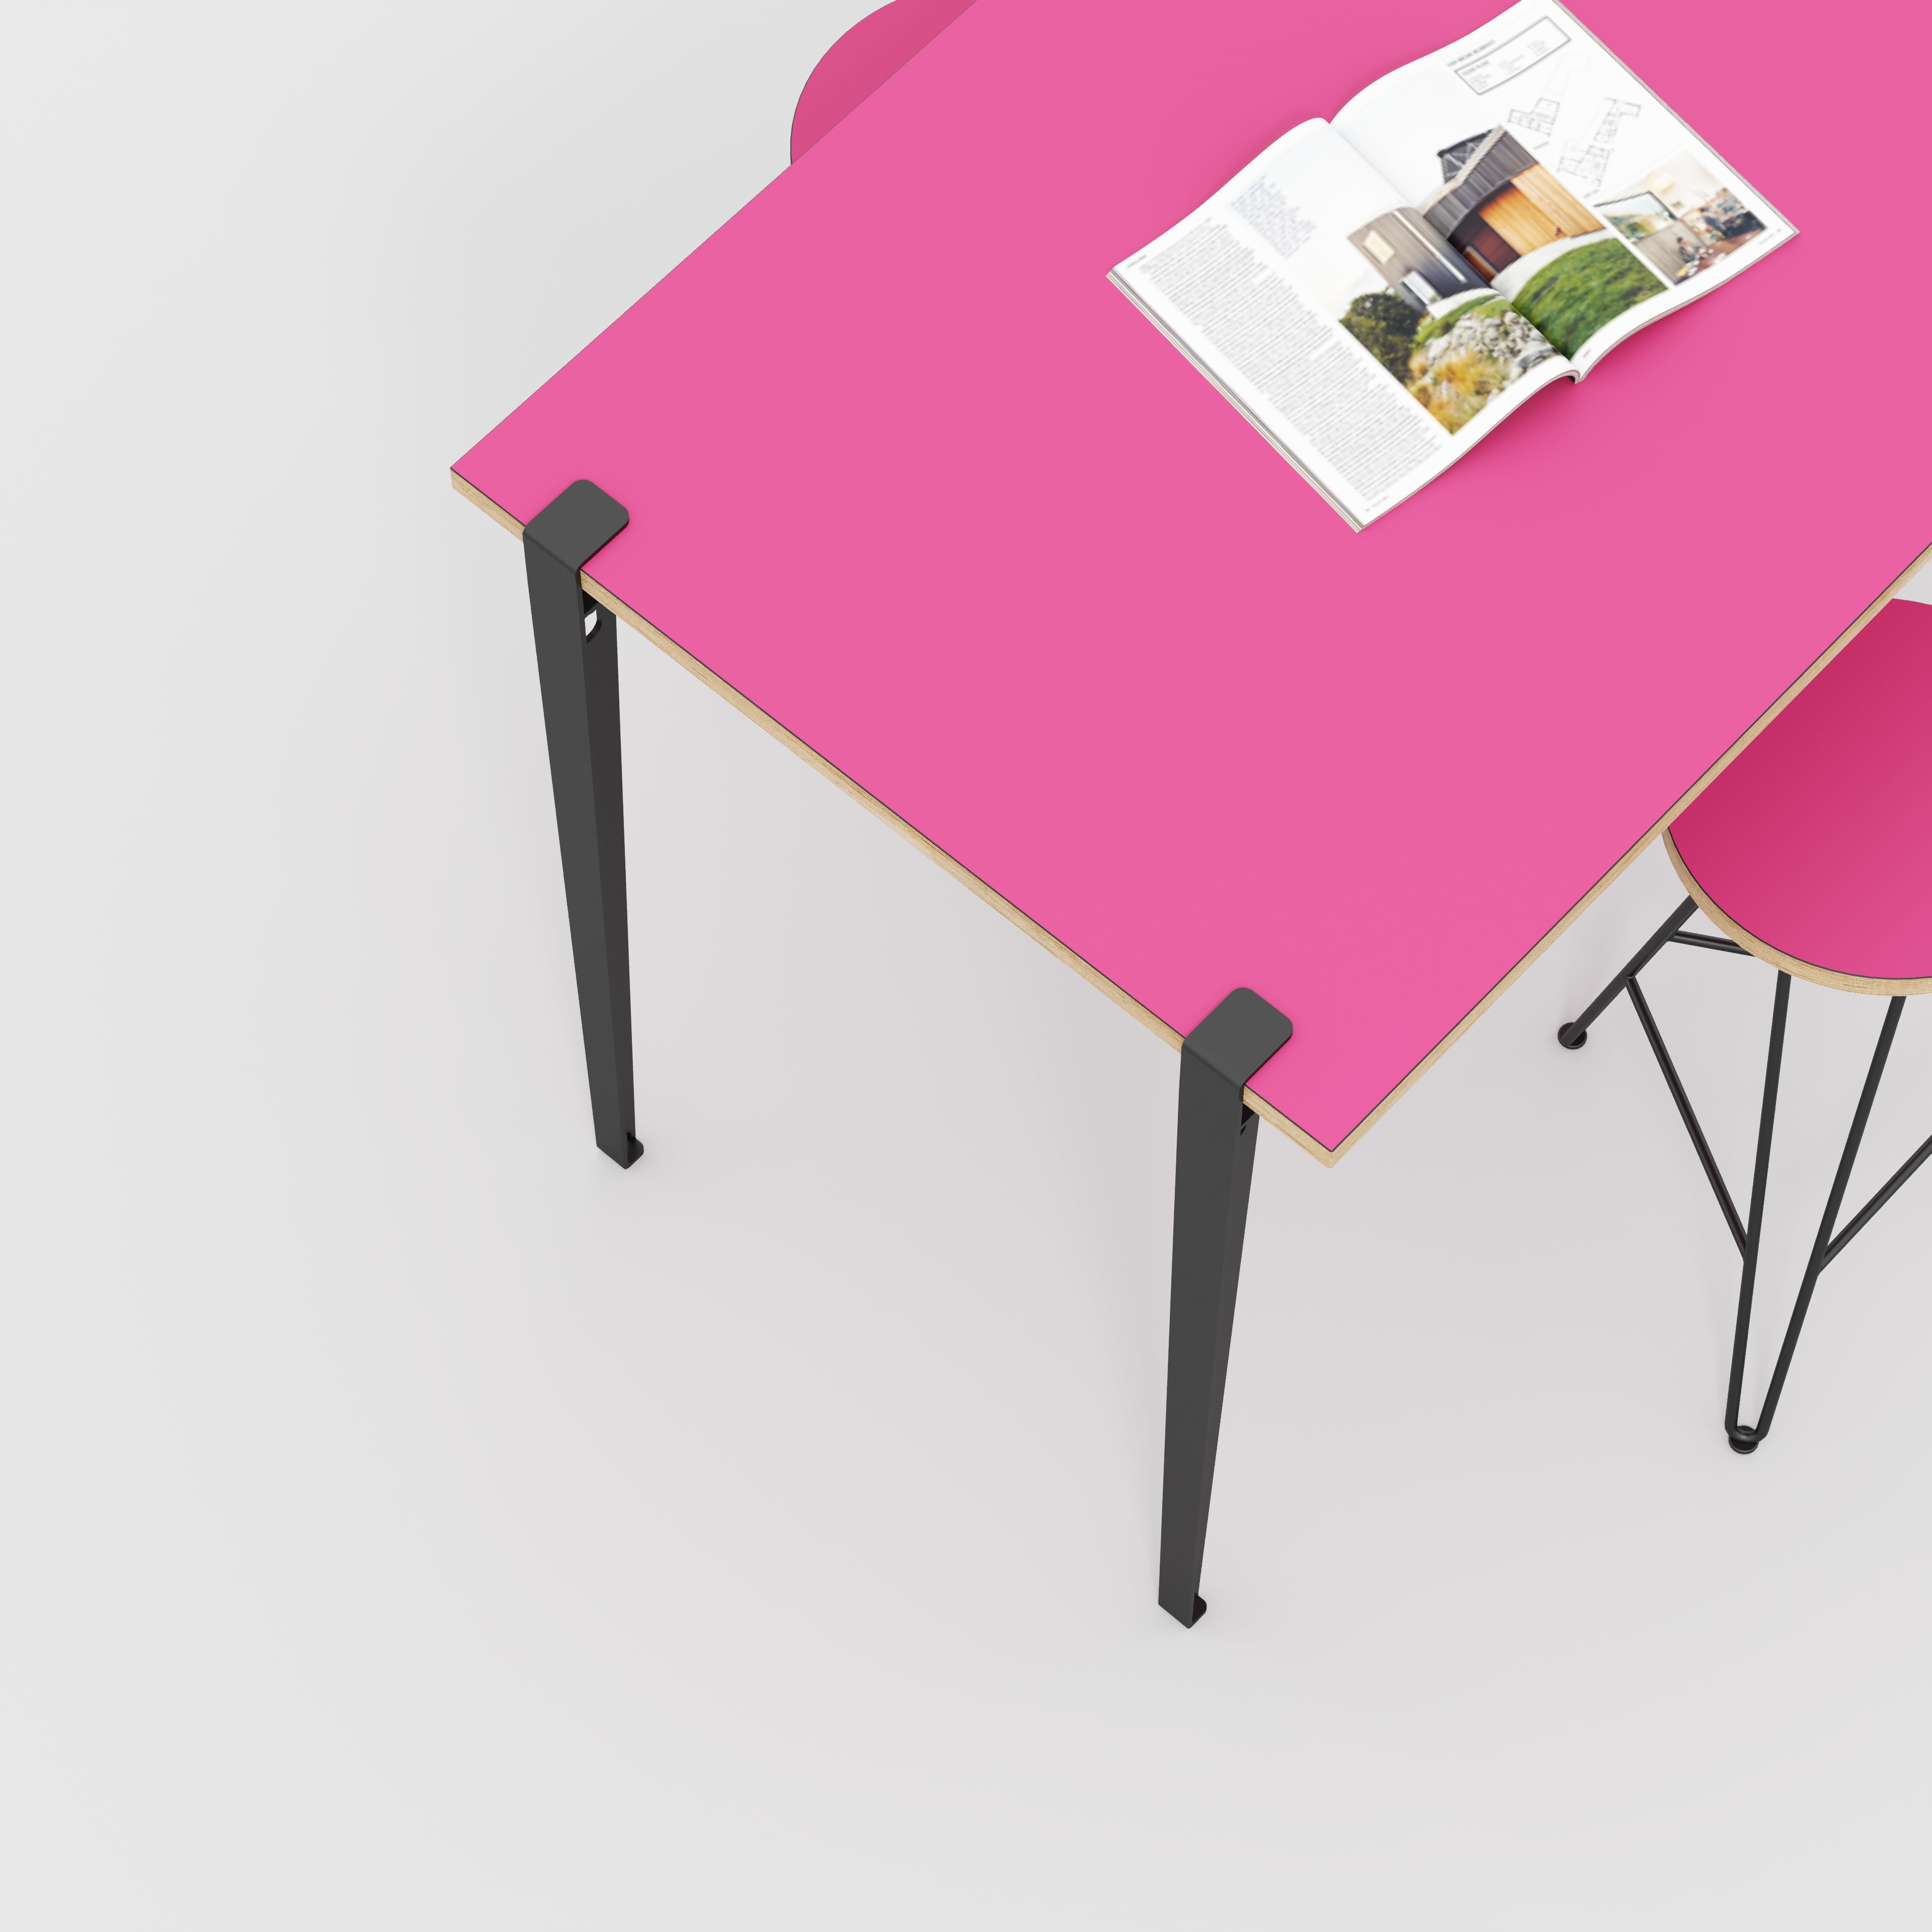 Wall Table with Black Tiptoe Legs and Brackets - Formica Juicy Pink - 1200(w) x 800(d) x 900(h)